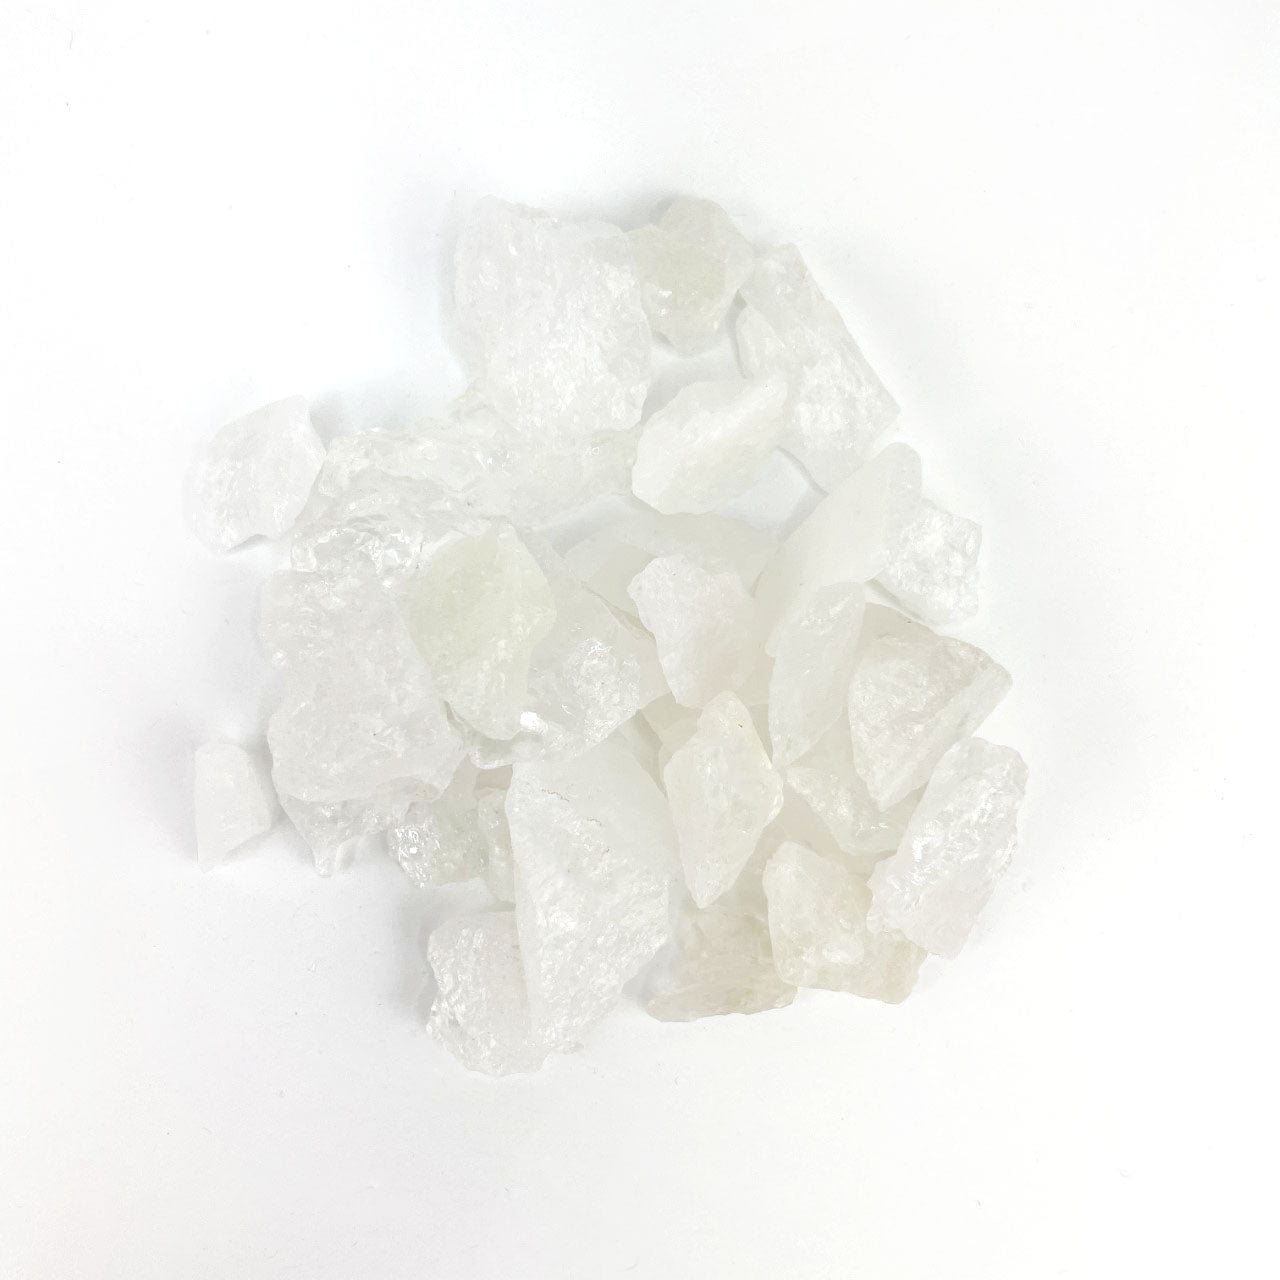 Crystal Quartz Stones in a pile on a table approximately 150 grams